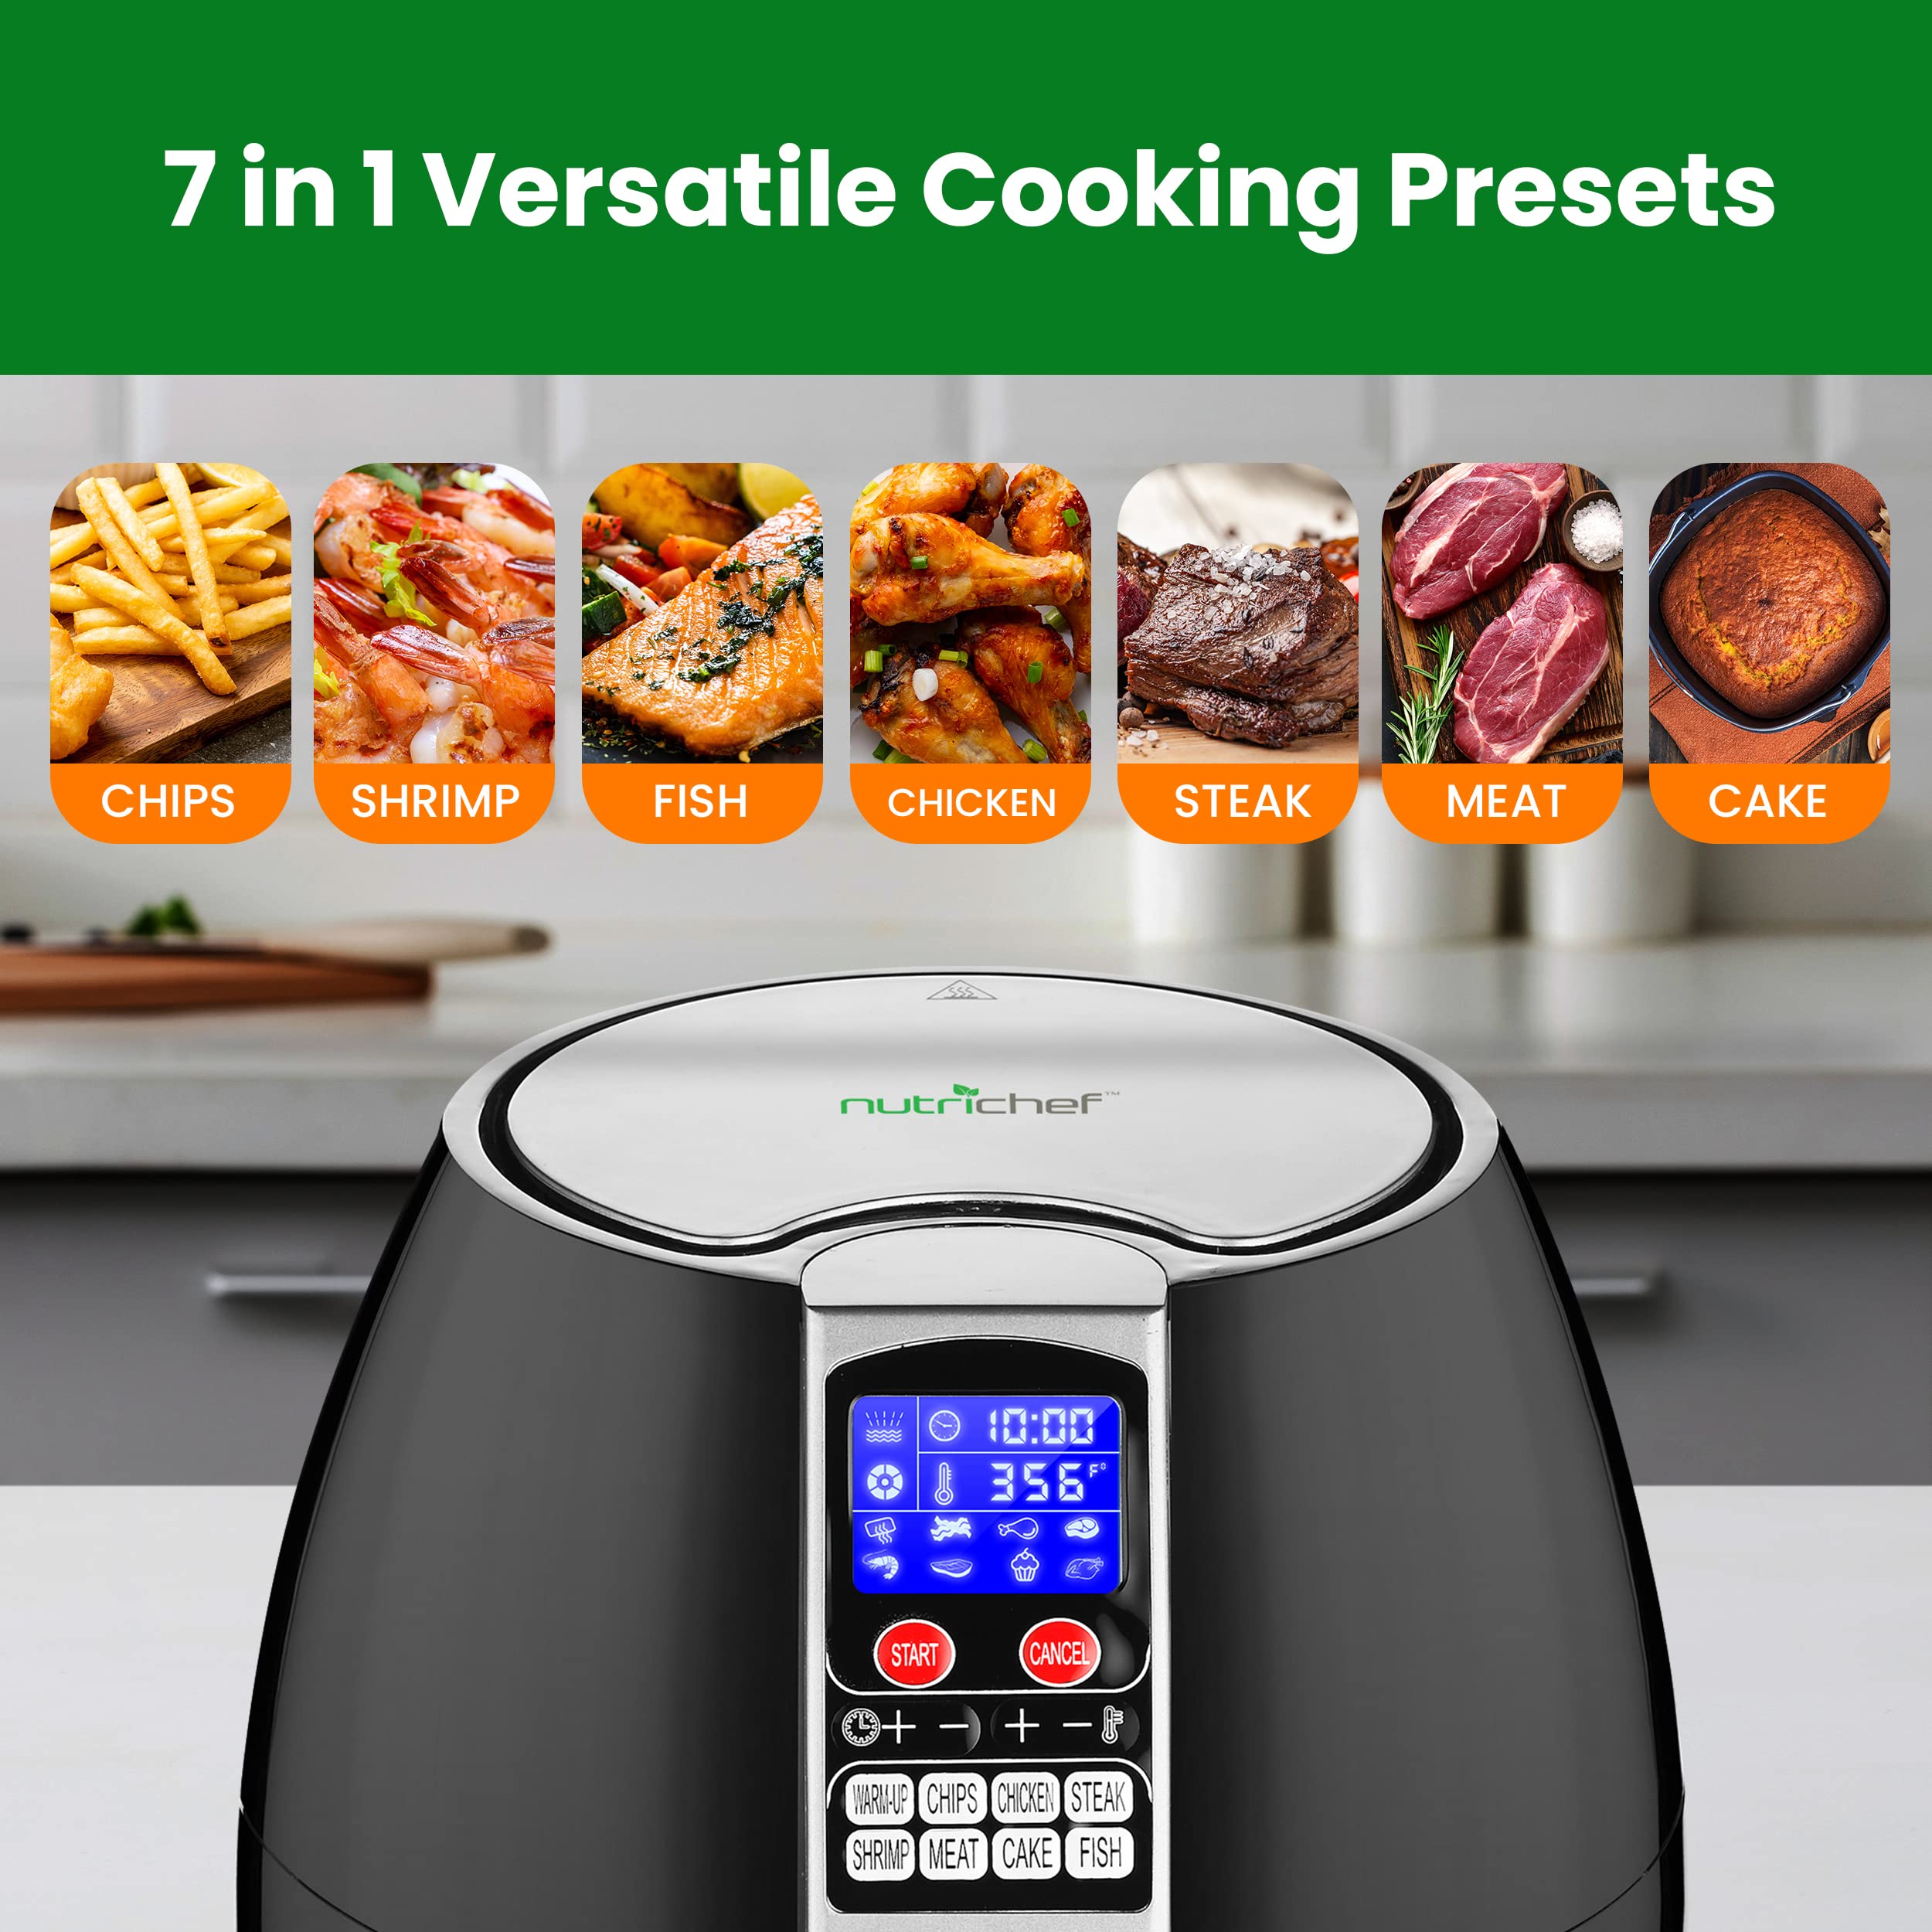 Hot Air Fryer Oven - Oilless Convection Power Multi Cooker with Digital Display and 3.7 Qt Capacity - Perfect for Baking, Grilling, and More - Includes Basket Pan - Stainless Steel